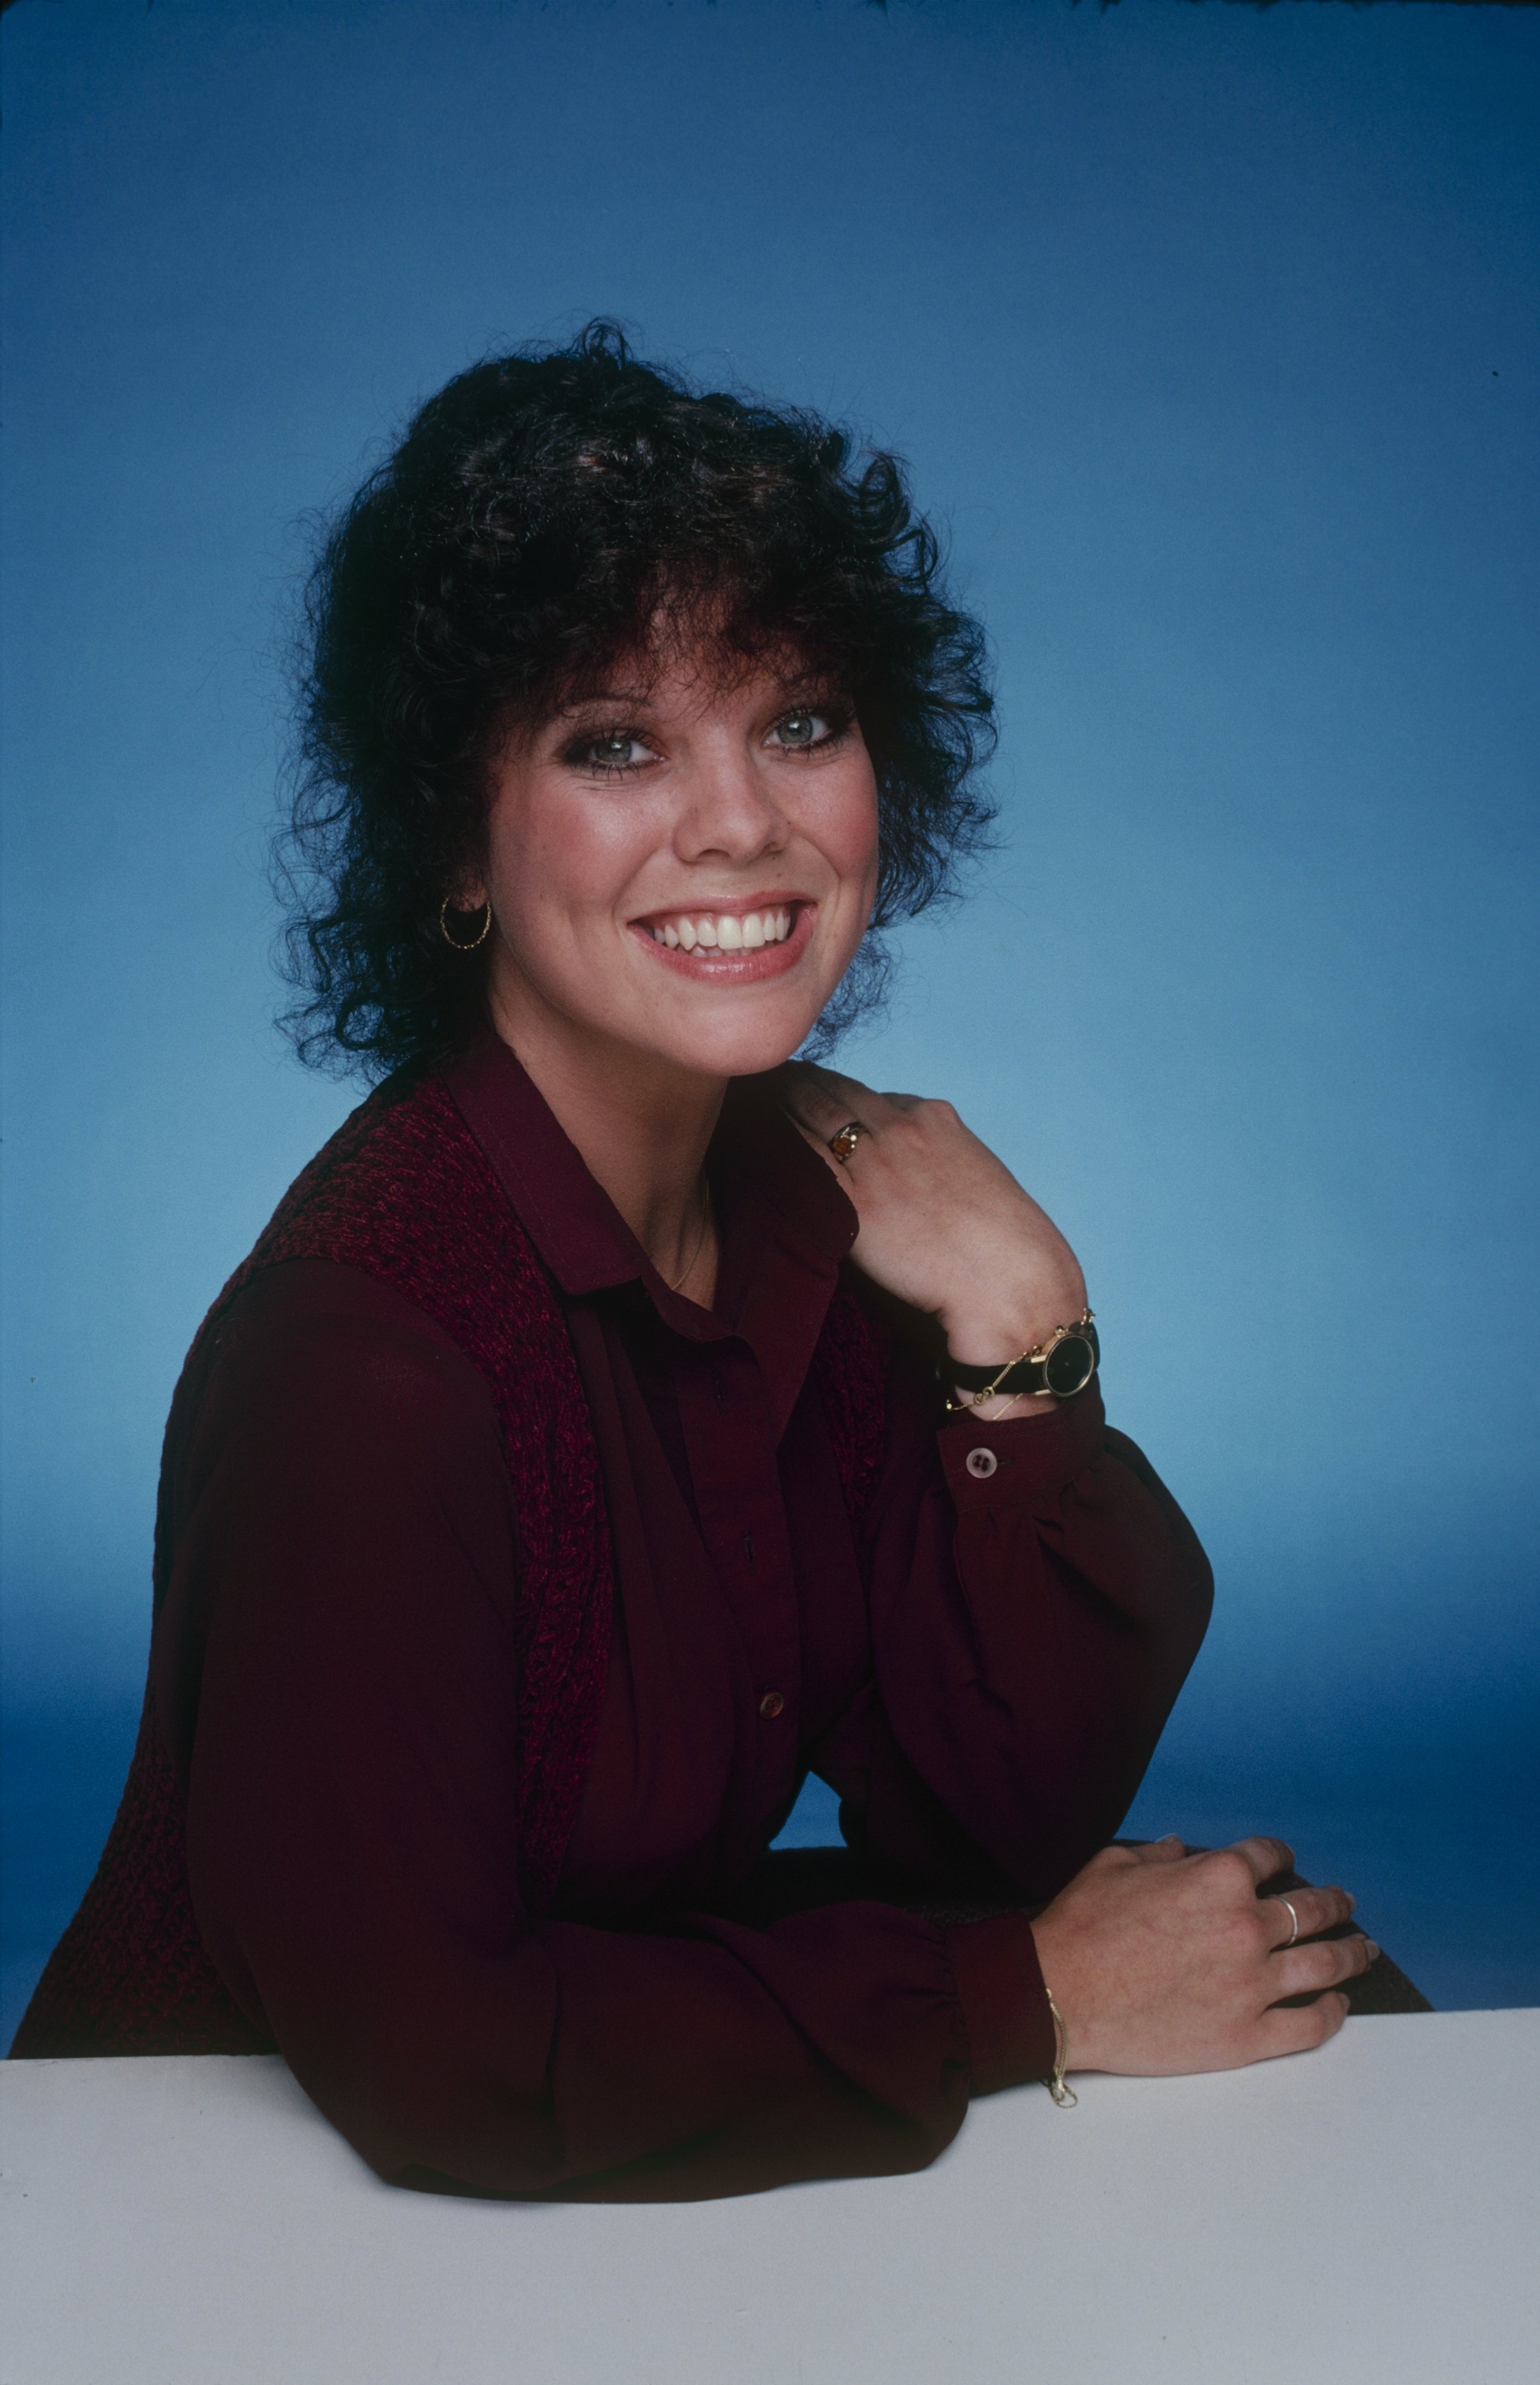 Actress Erin Moran on the set of "Happy Days" on May 1, 1979 | Source: Getty Images